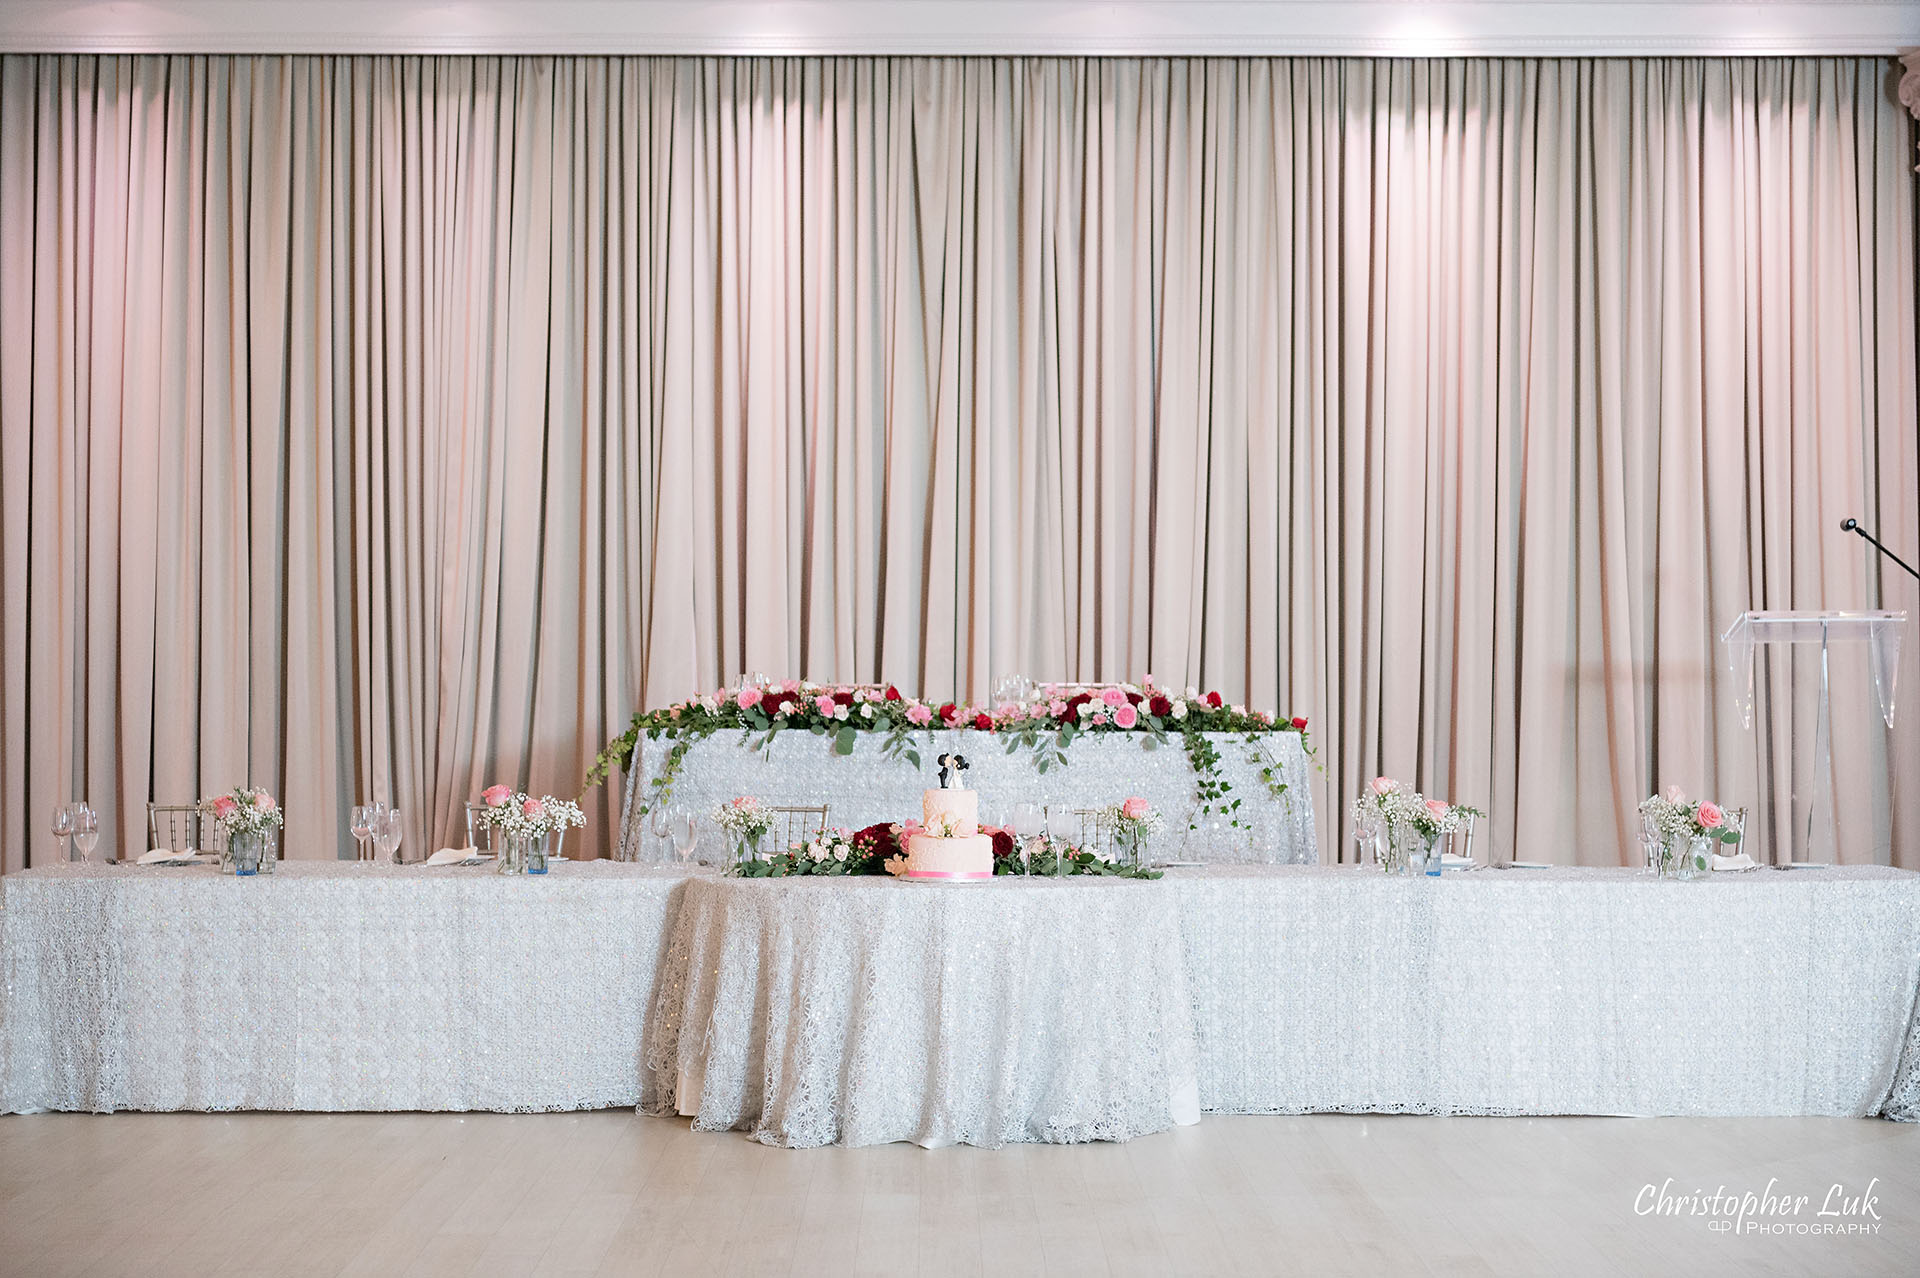 Christopher Luk Toronto Wedding Photographer Bridle Trail Baptist Church Unionville Main Street Crystal Fountain Event Venue Head Table Decor Flower Bell by Masami Crystal Linen Setup Wide Stage Curtains 